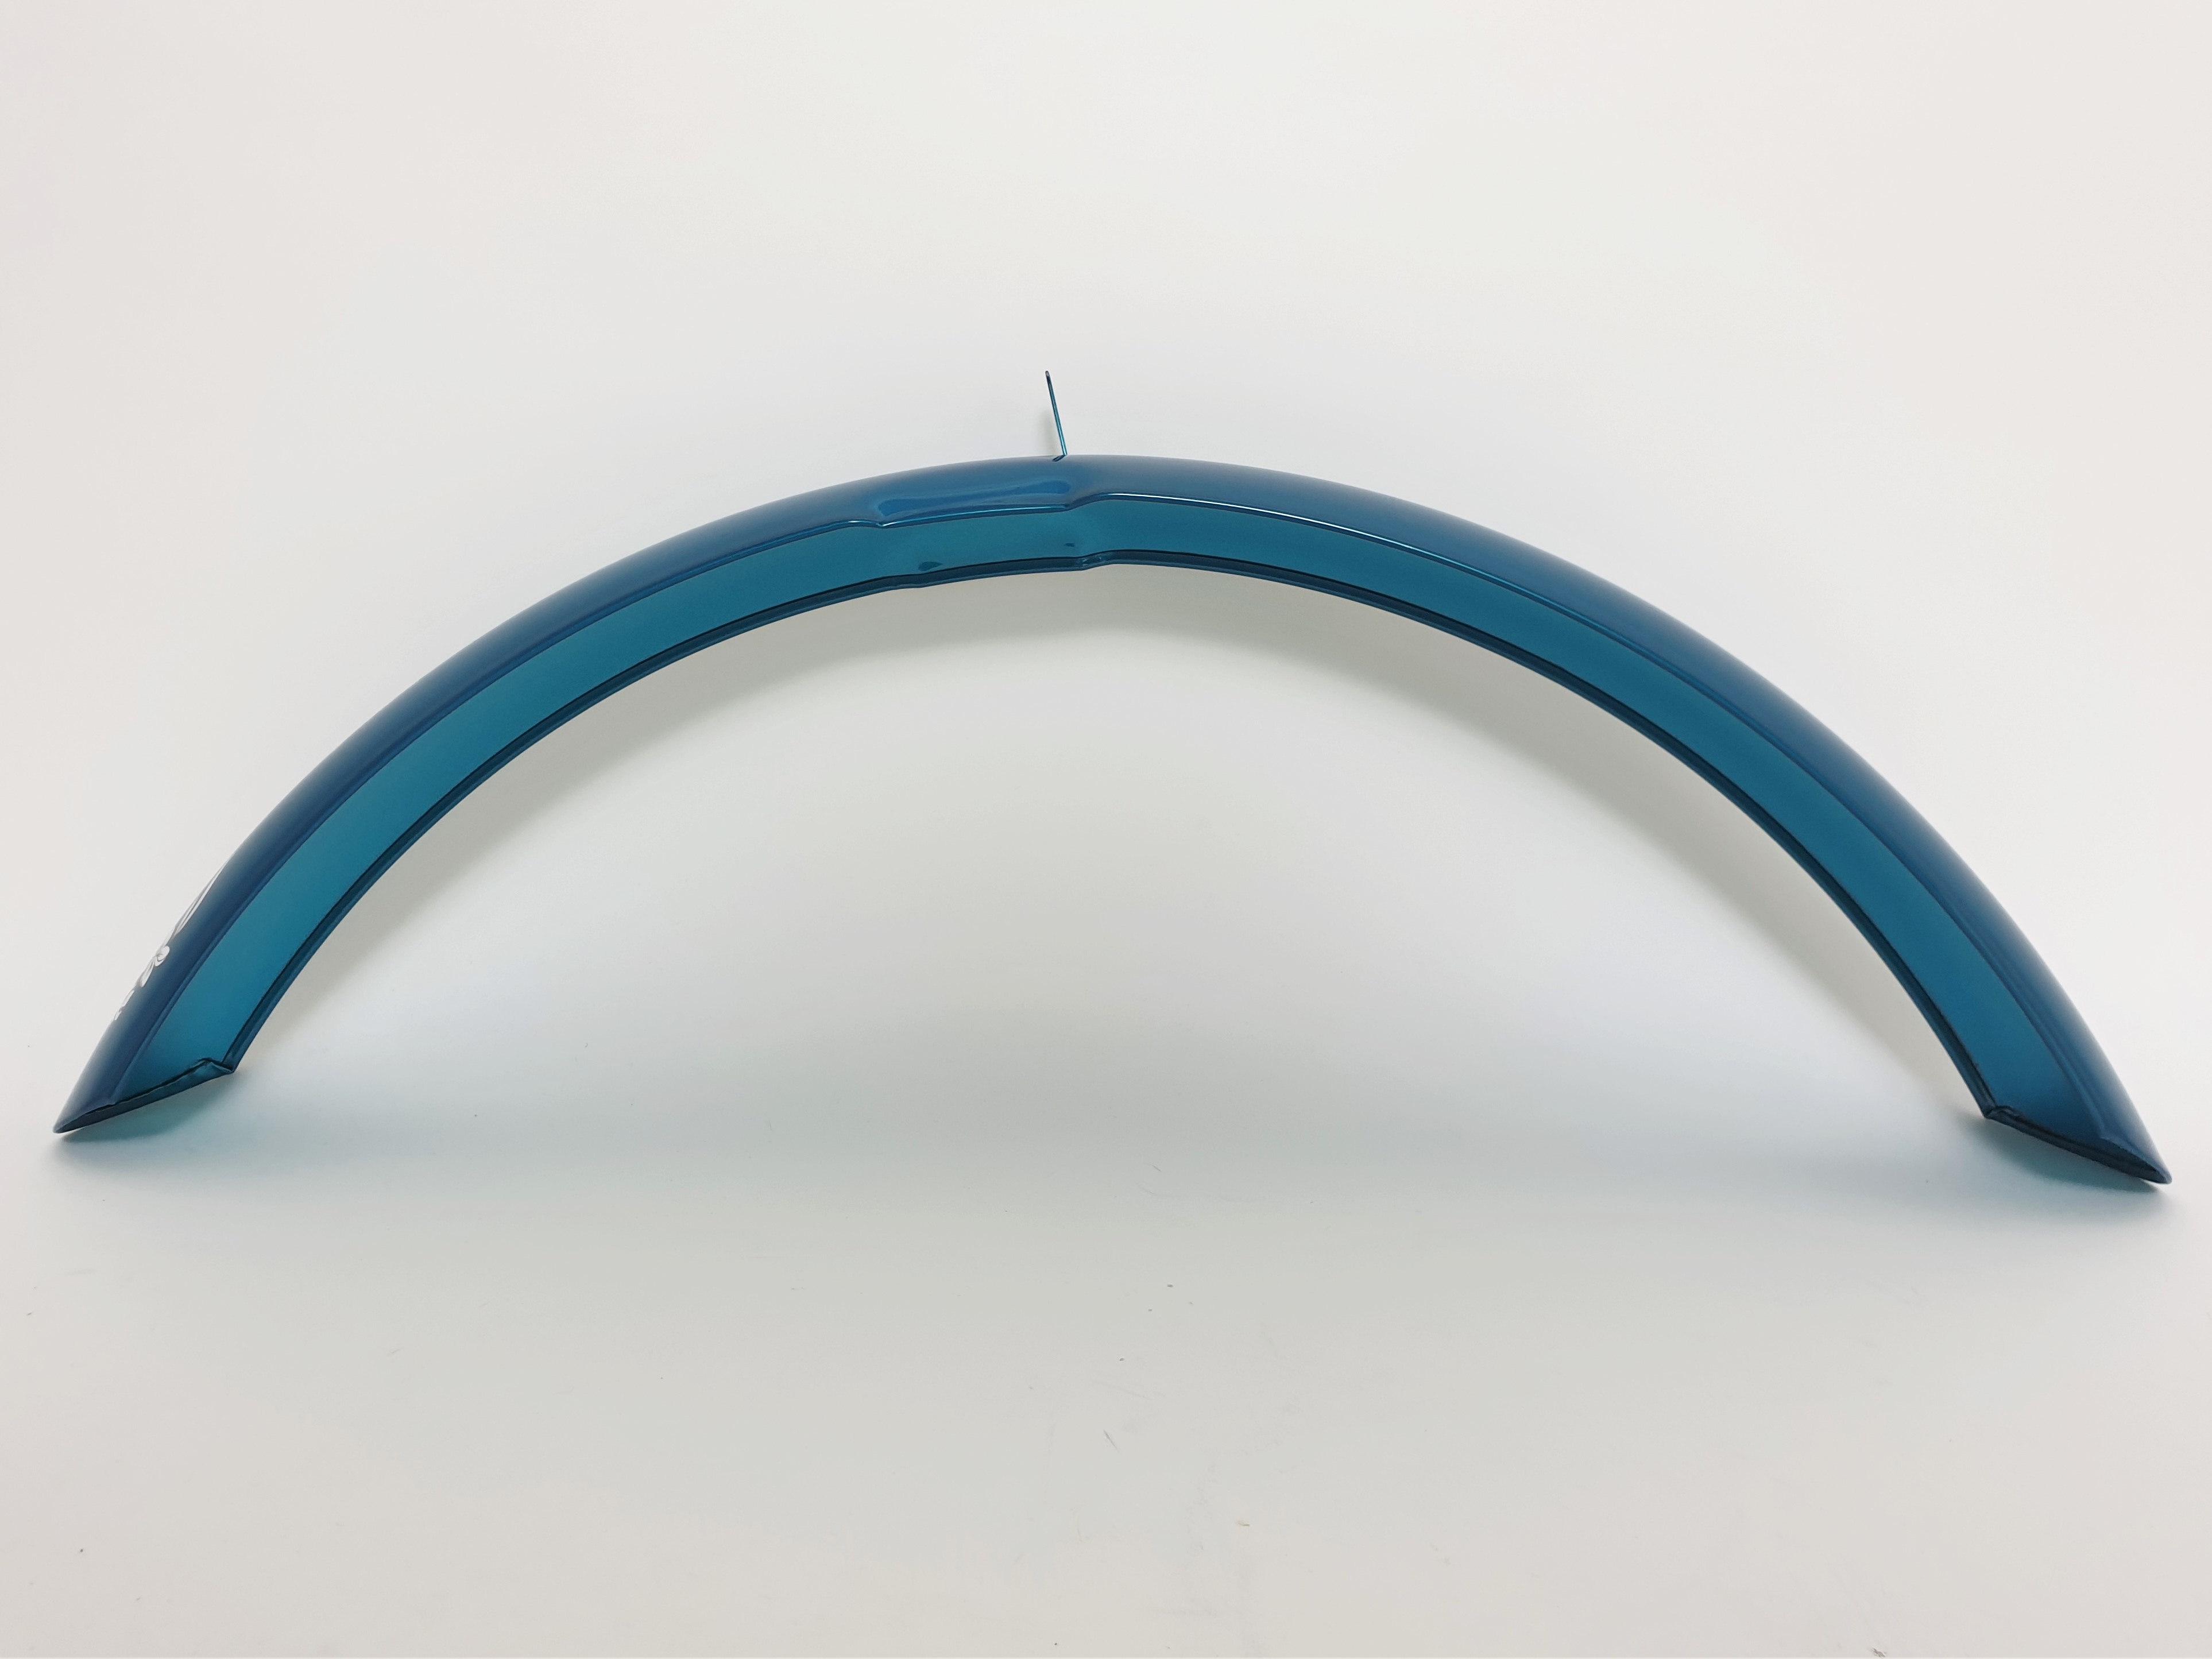 ELECTRA Hawaii original Front Fender 26" turquoise